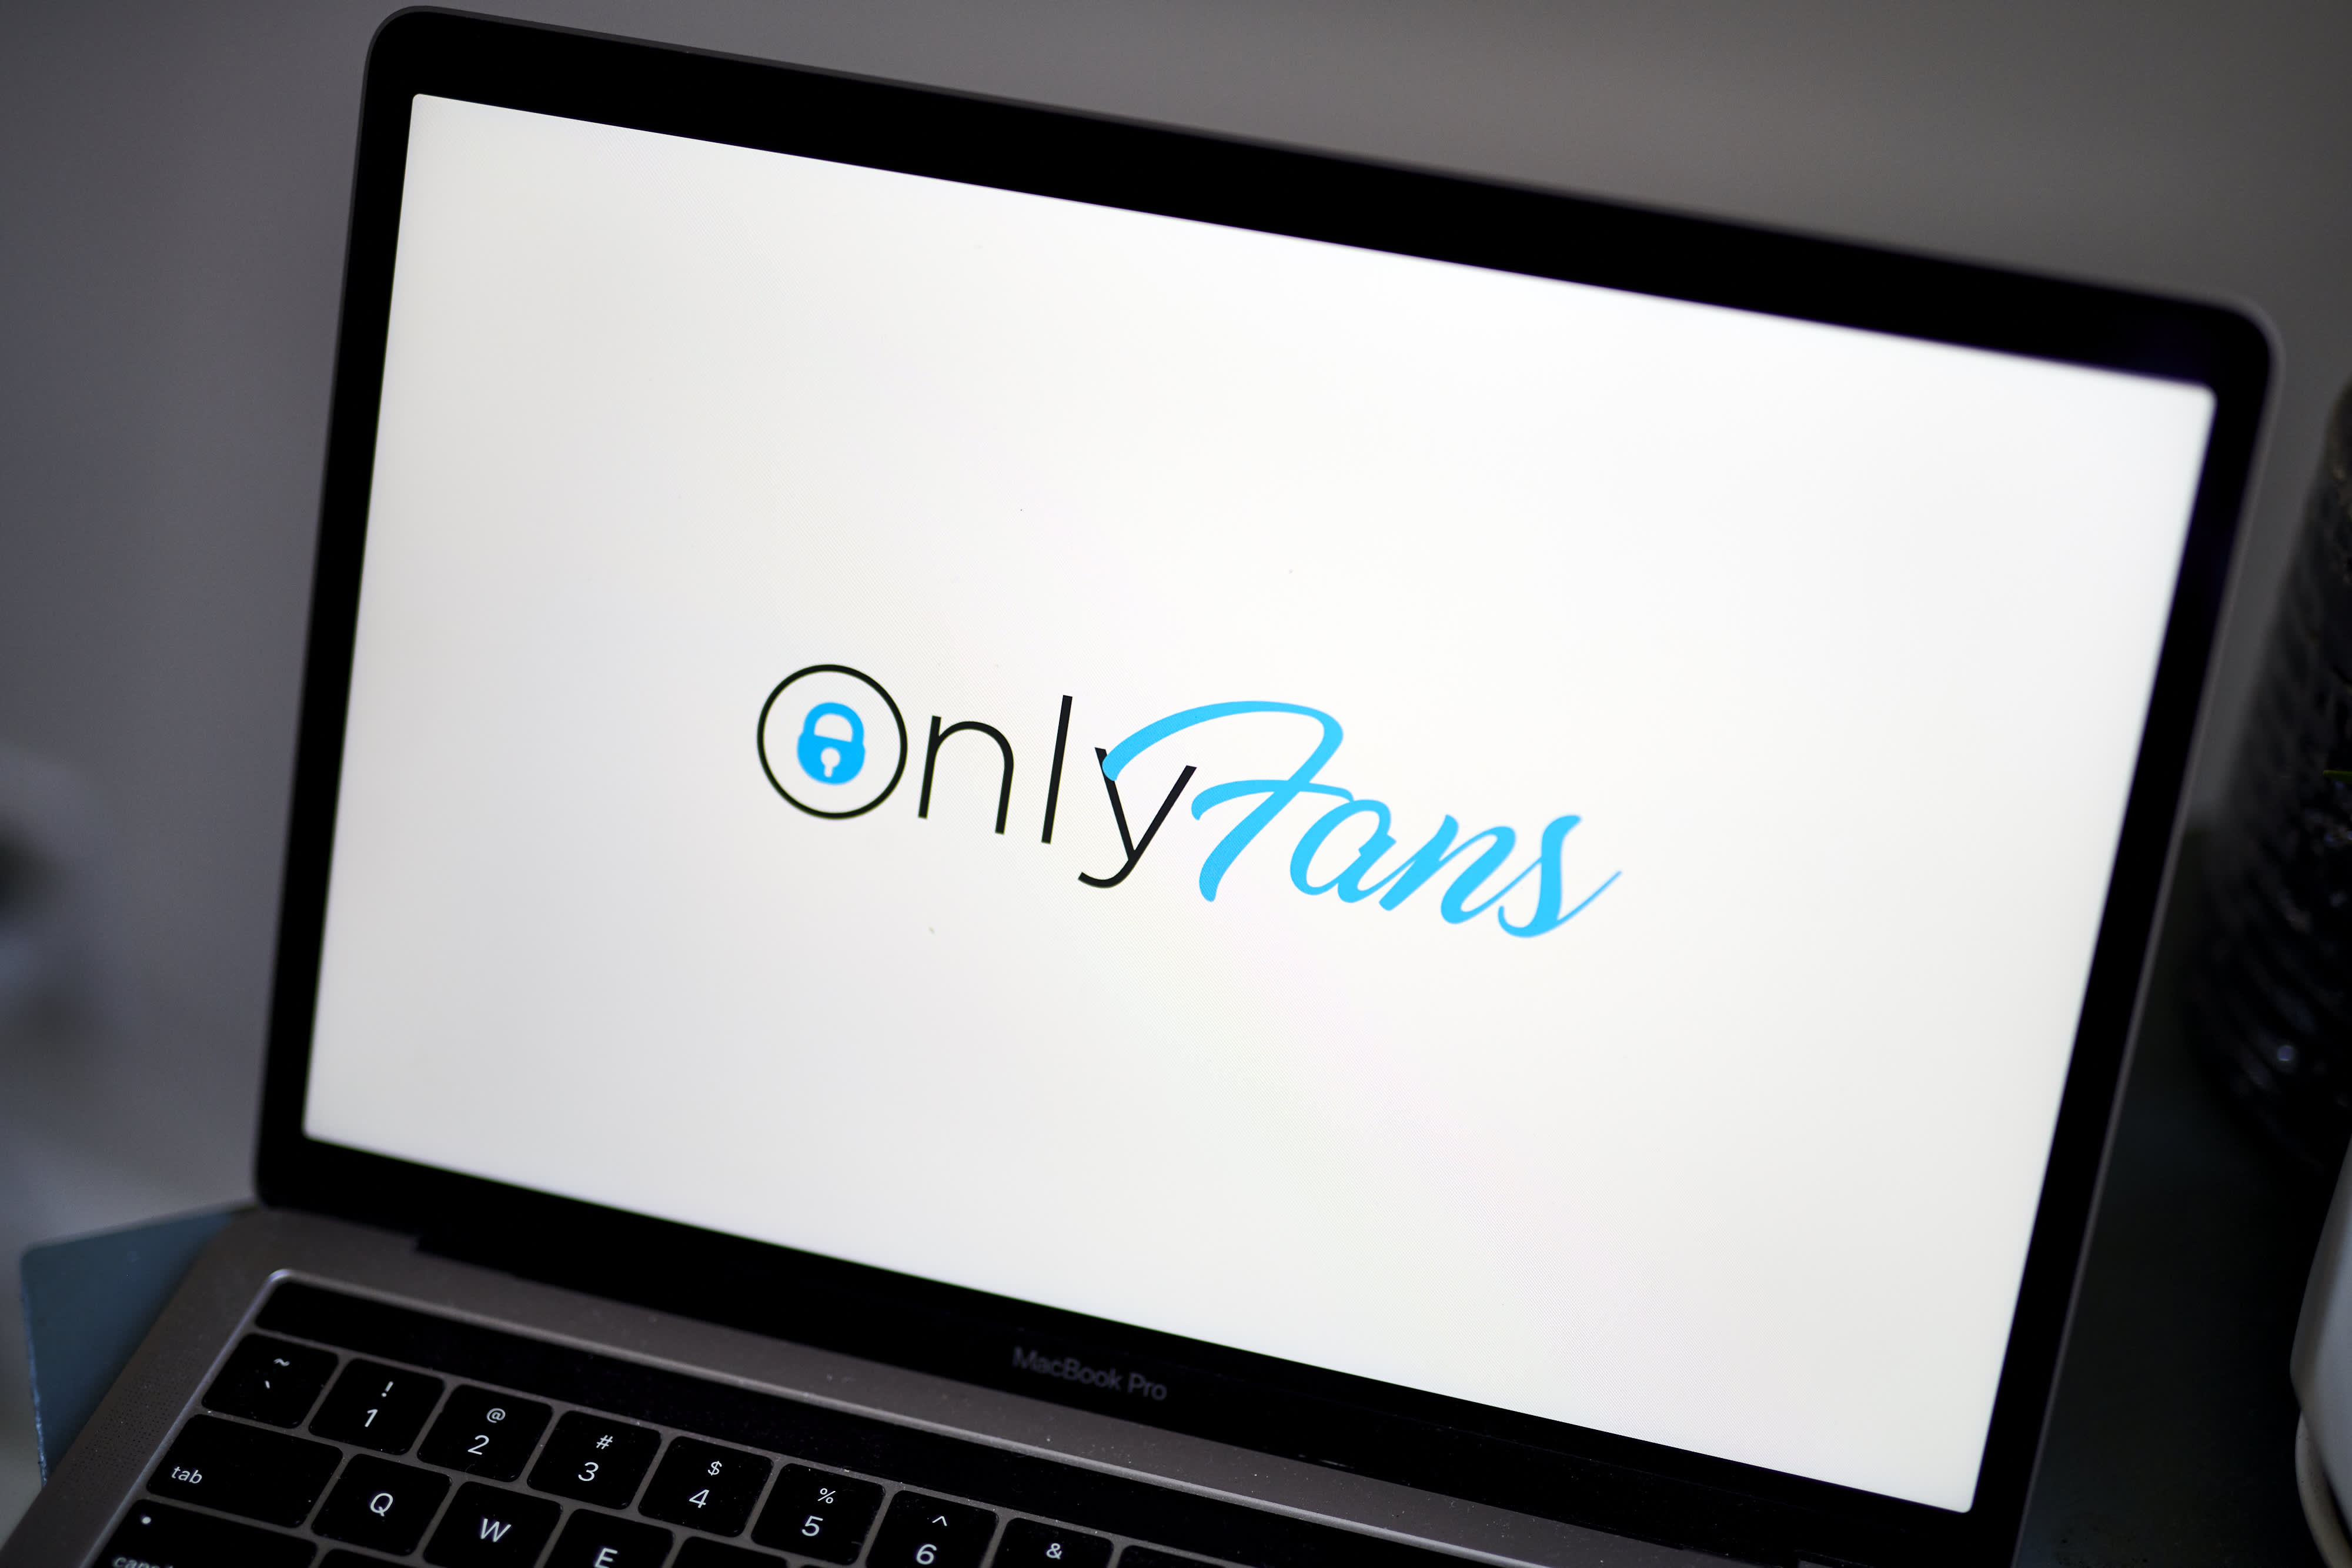 Rape Fuck Video Watch - OnlyFans bans sexually explicit content